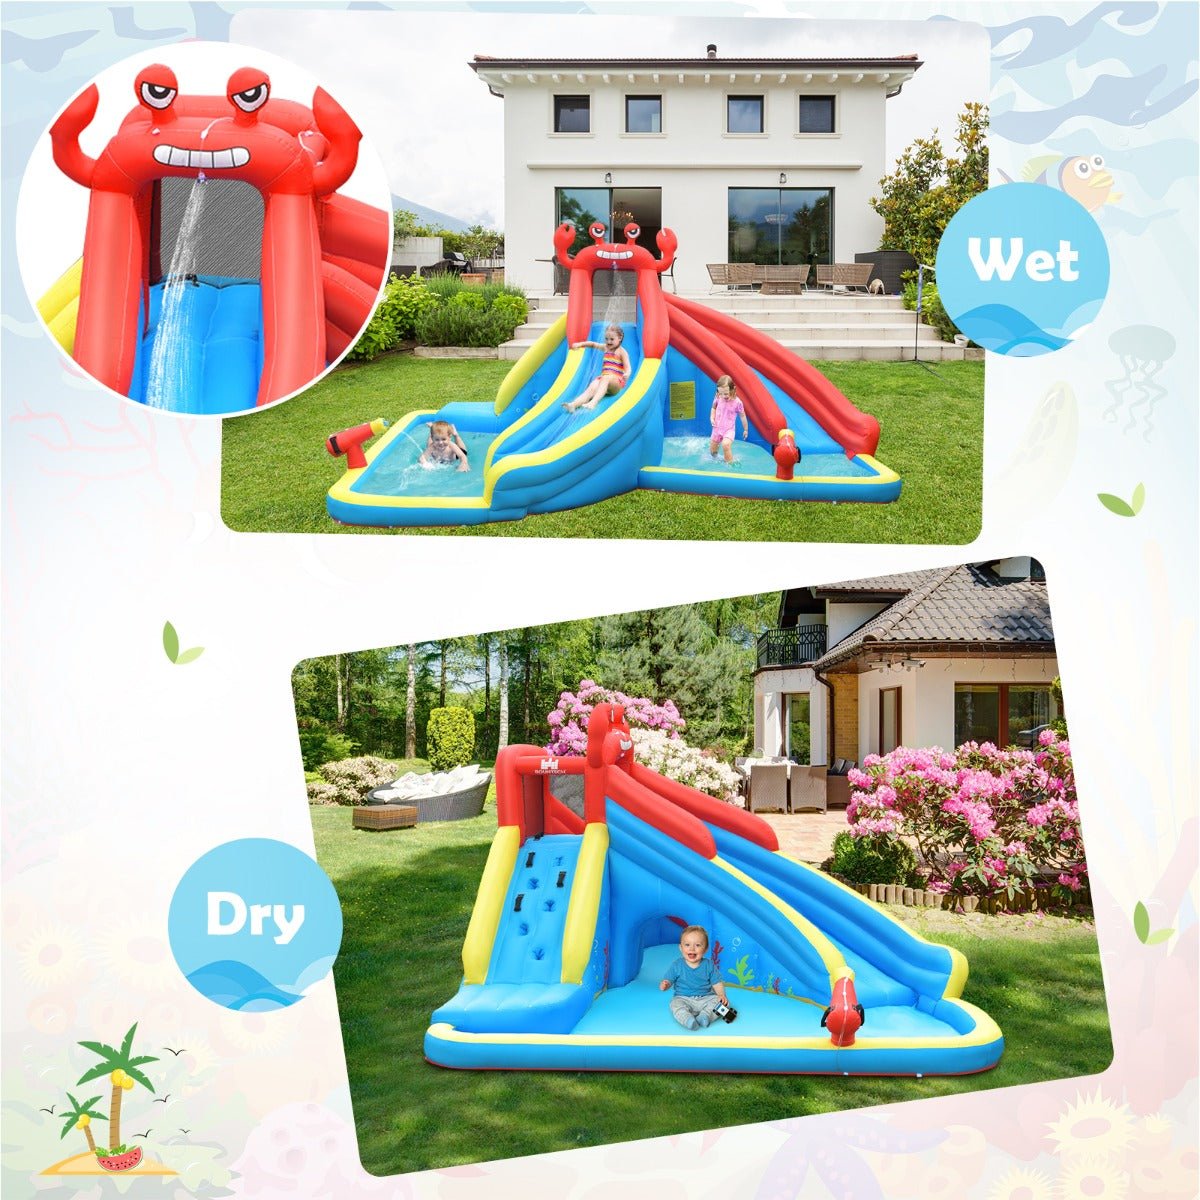 Kids' Water Paradise with Our Inflatable Crab Slide